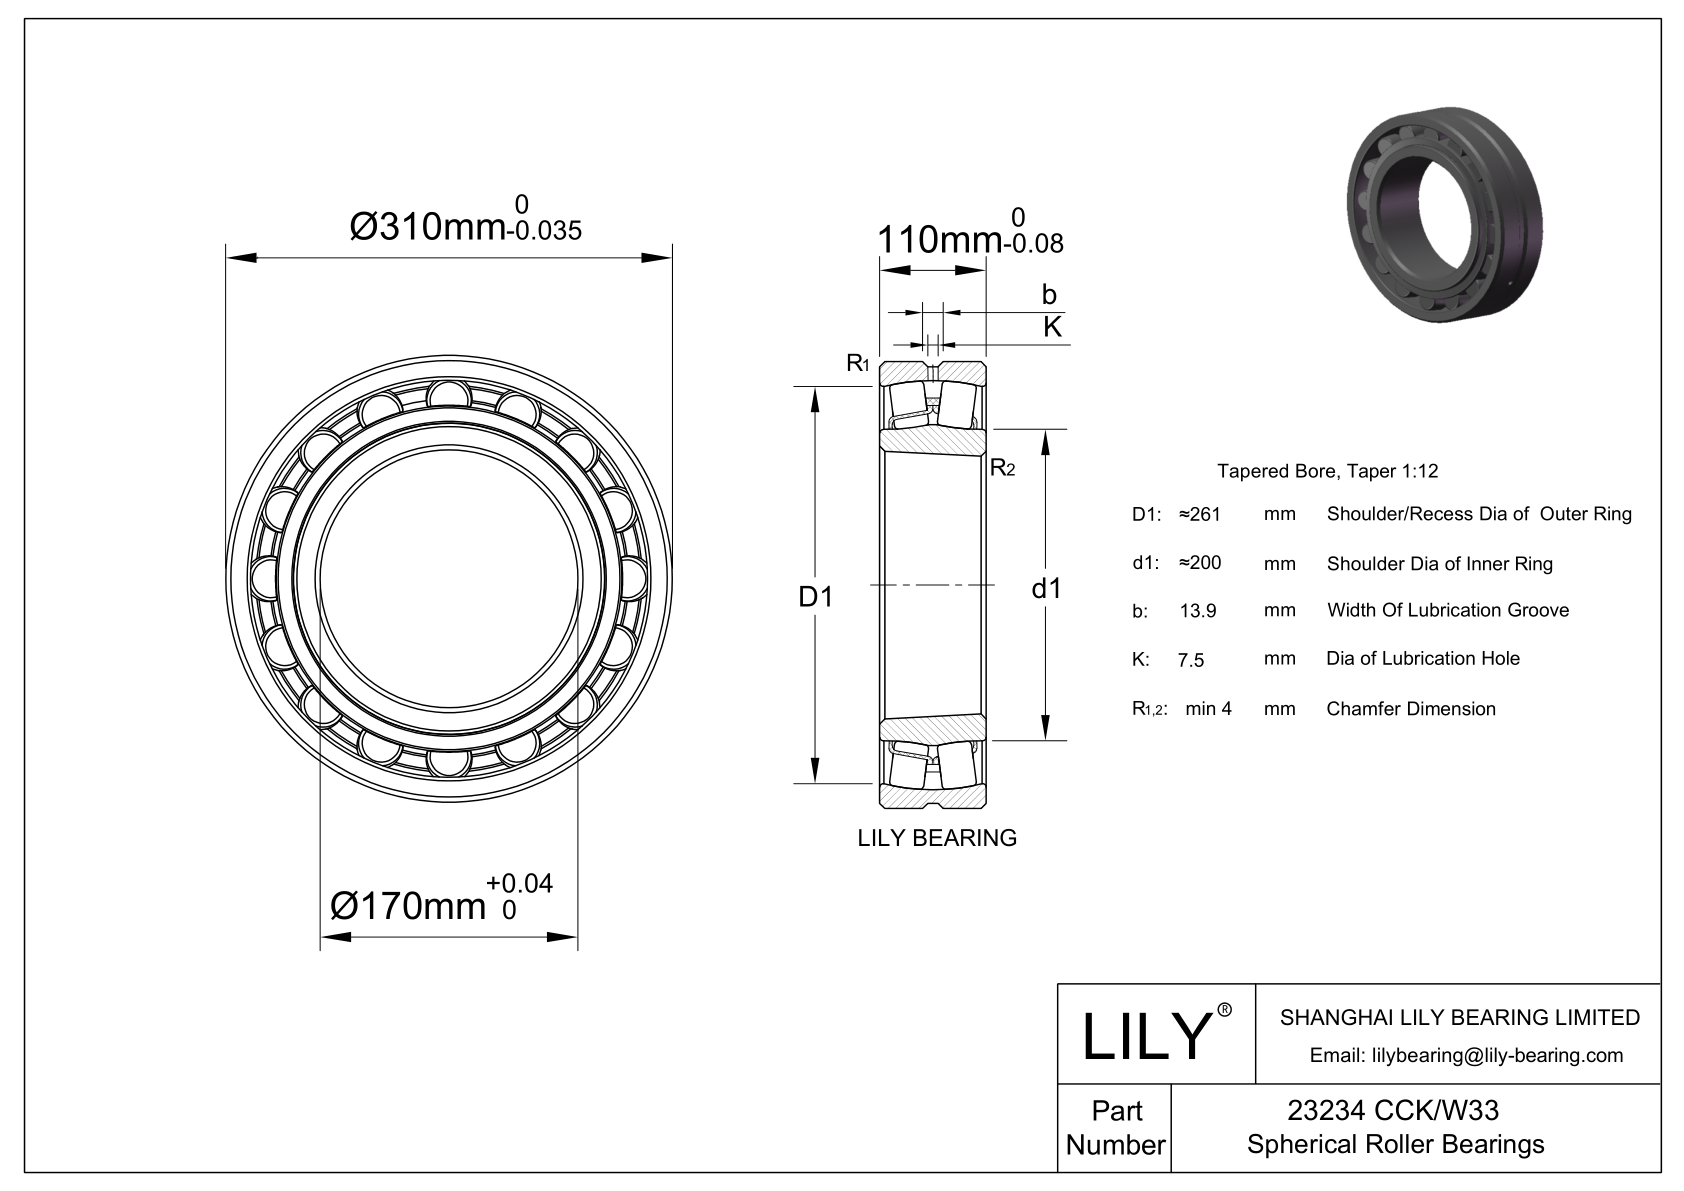 23234 CCK/W33 Double Row Spherical Roller Bearing cad drawing